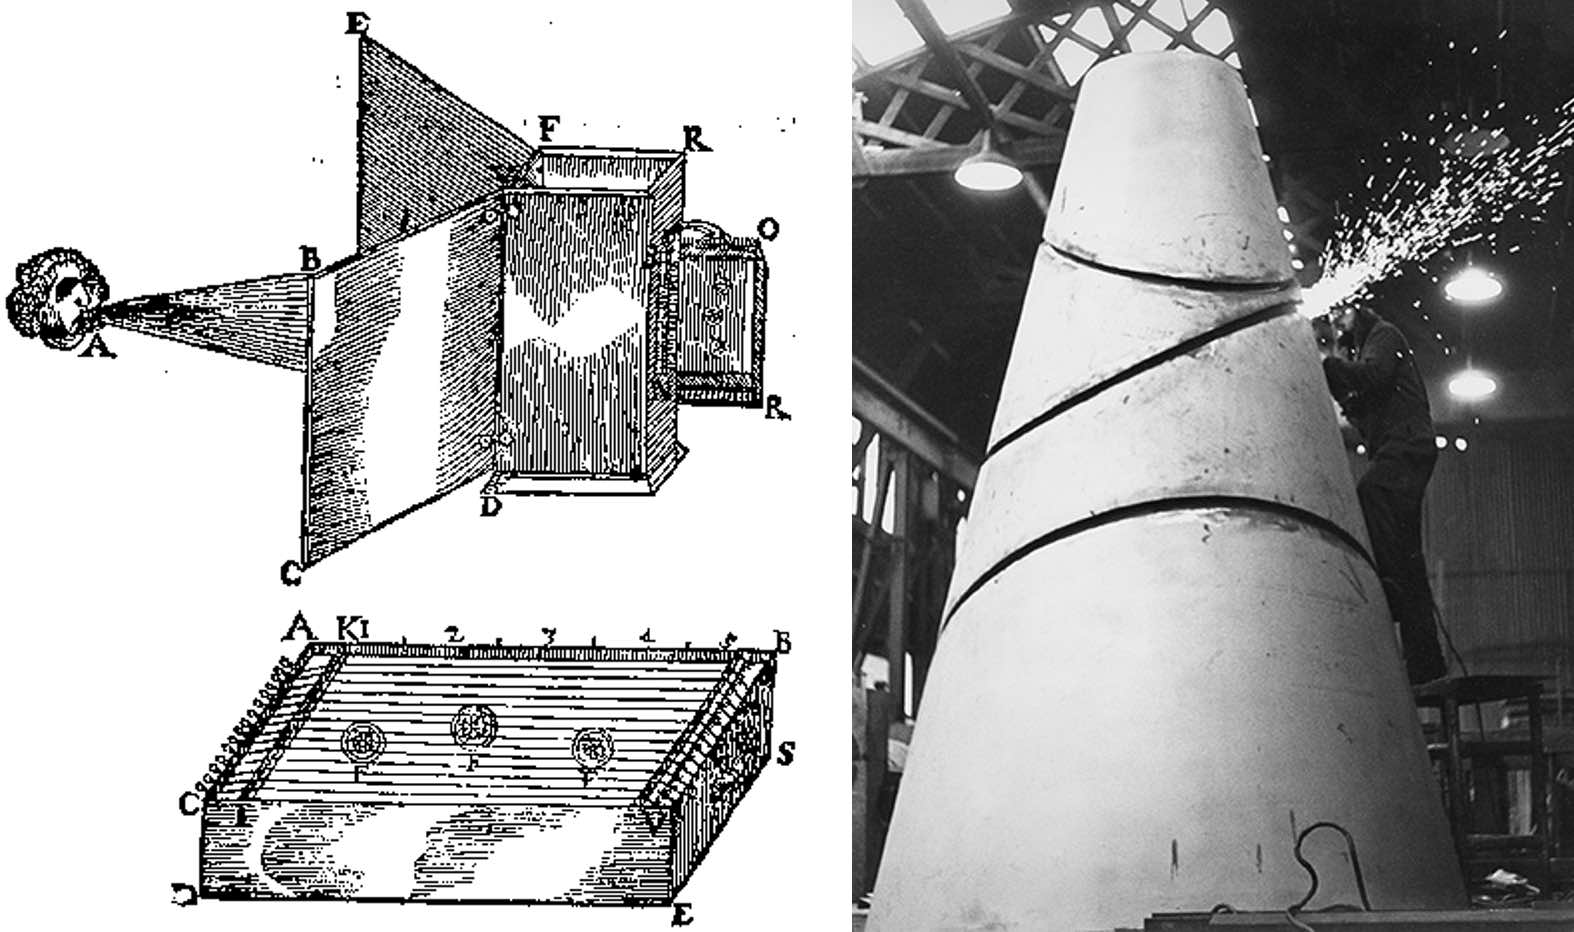 two images side by side - the first being another image of Lijn's Whirling Windtower in landscape and the second older style images of aeolian harp designs